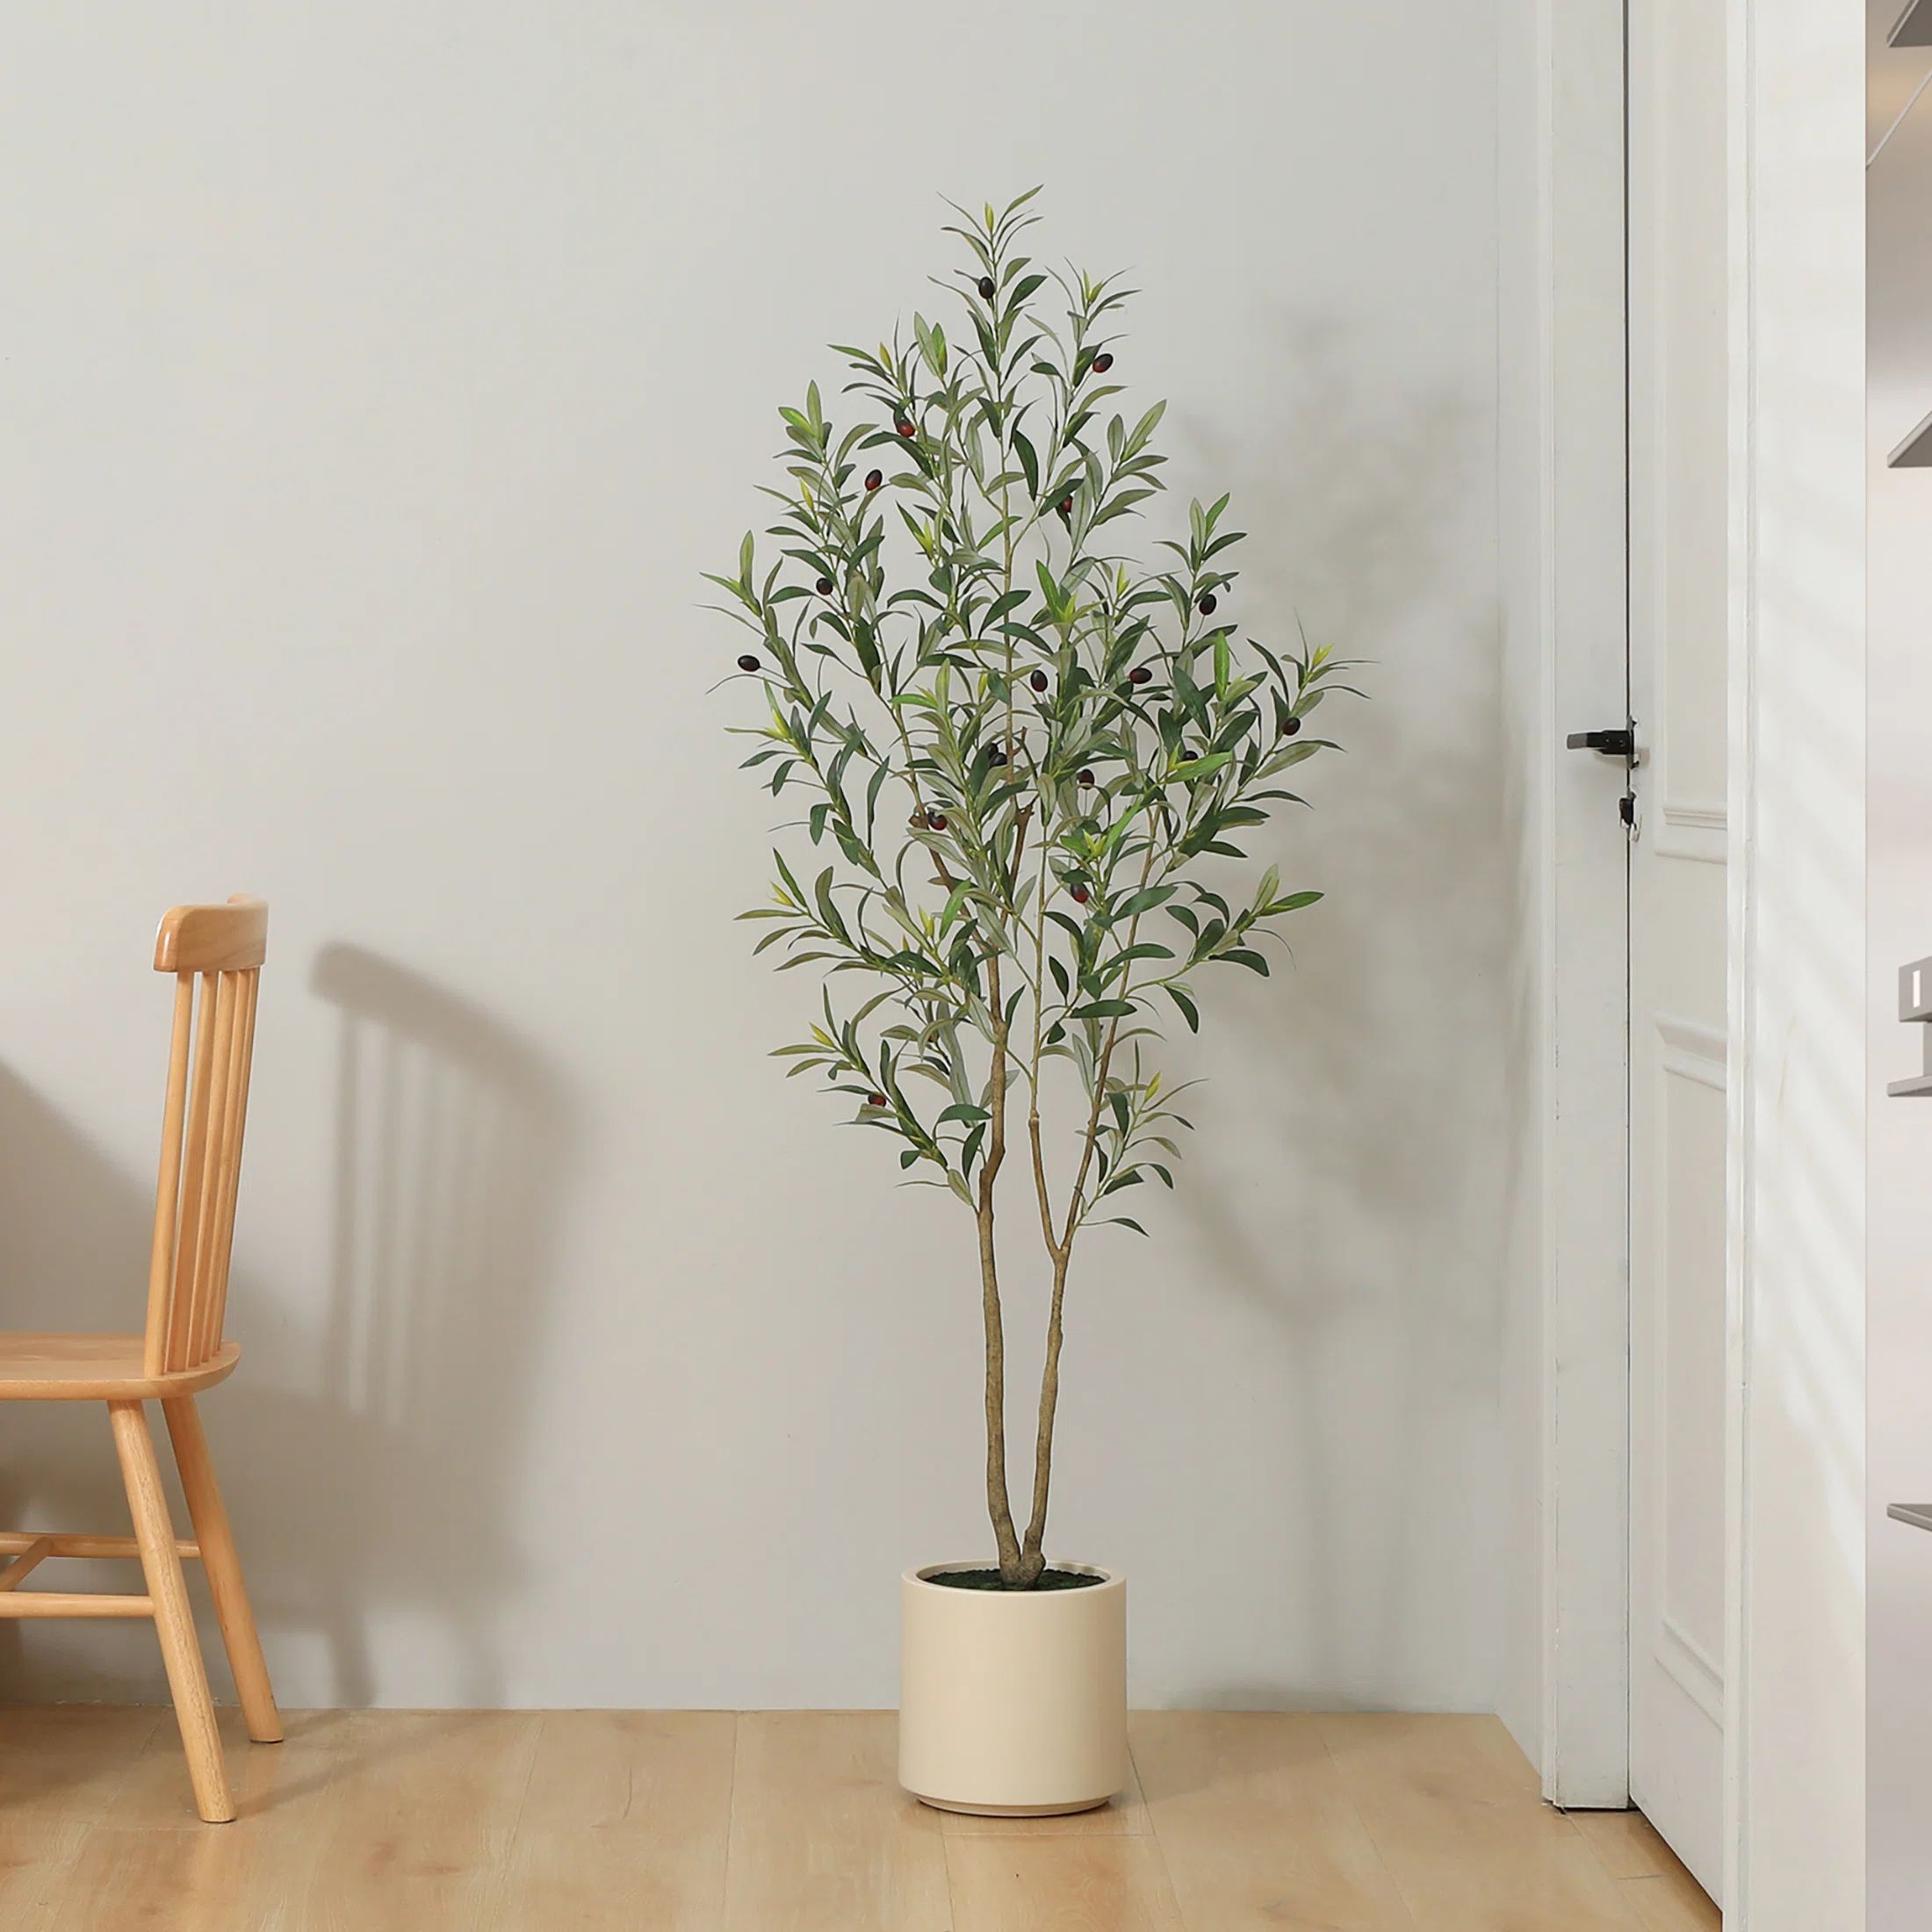 Adcock Faux Olive Tree in White Planter, Lifelike Fake Olive Plant for Indoor and Outdoor Decor | Wayfair North America